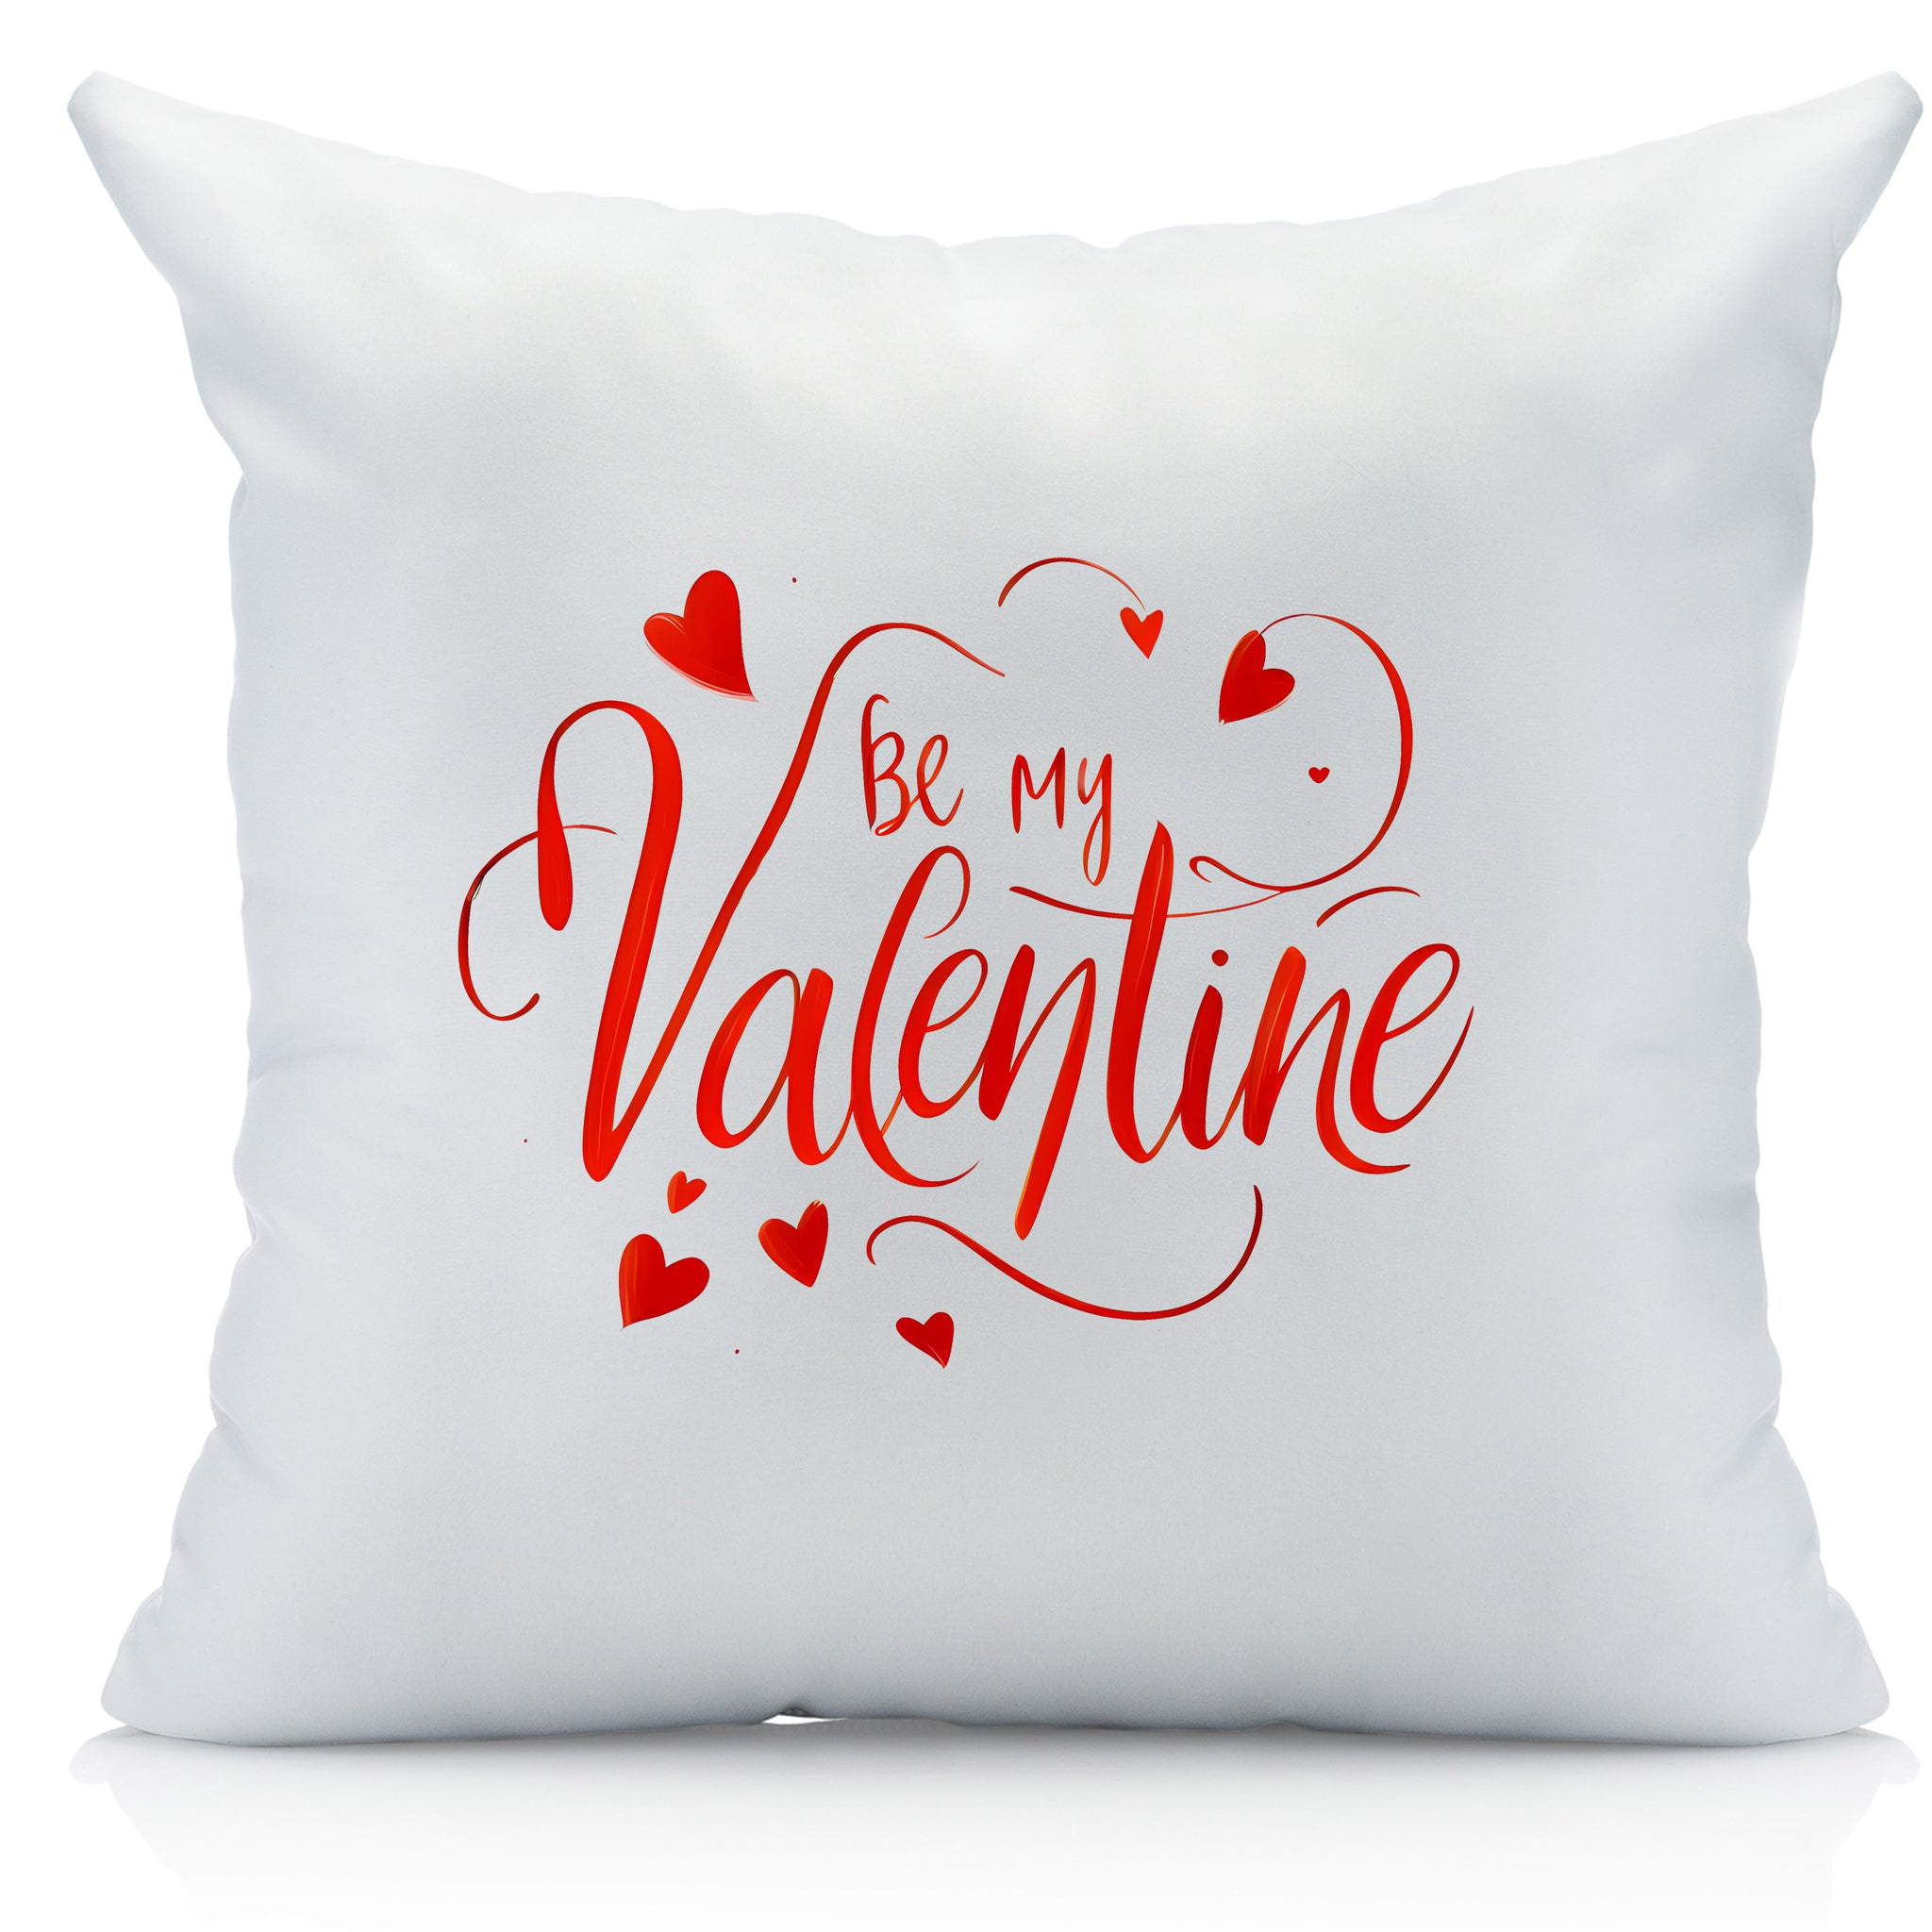 Be My Valentine Red Pillow Cover - Perfect Gift For Couples, Valentines Day Gift, Valentines Décor and Romantic Gift